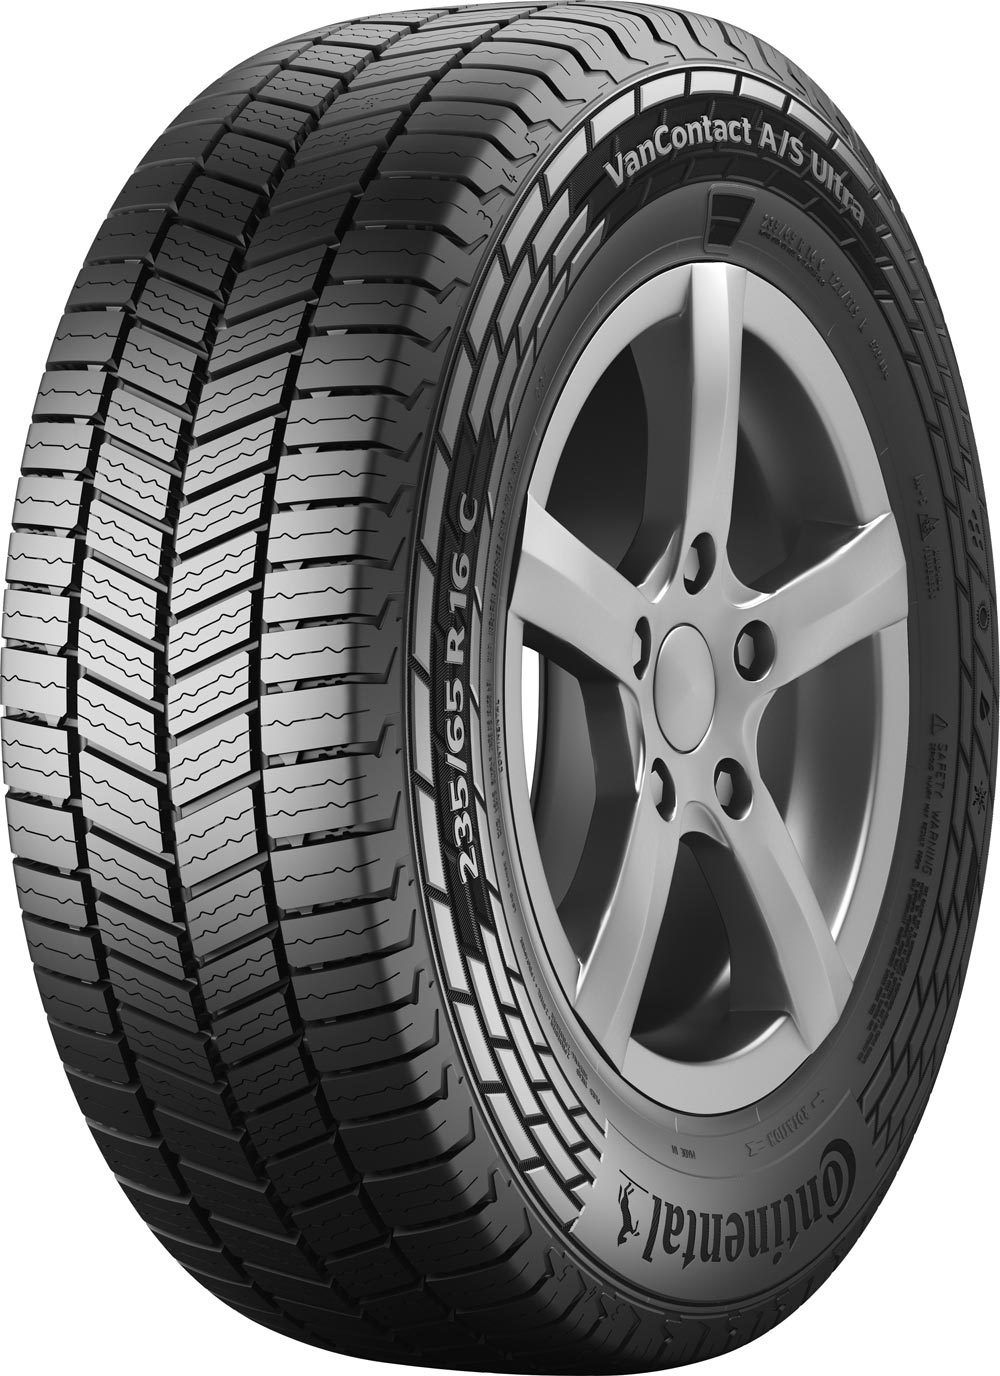 Anvelope microbuz CONTINENTAL VanContact A/S Ultra 225/65 R16 112R